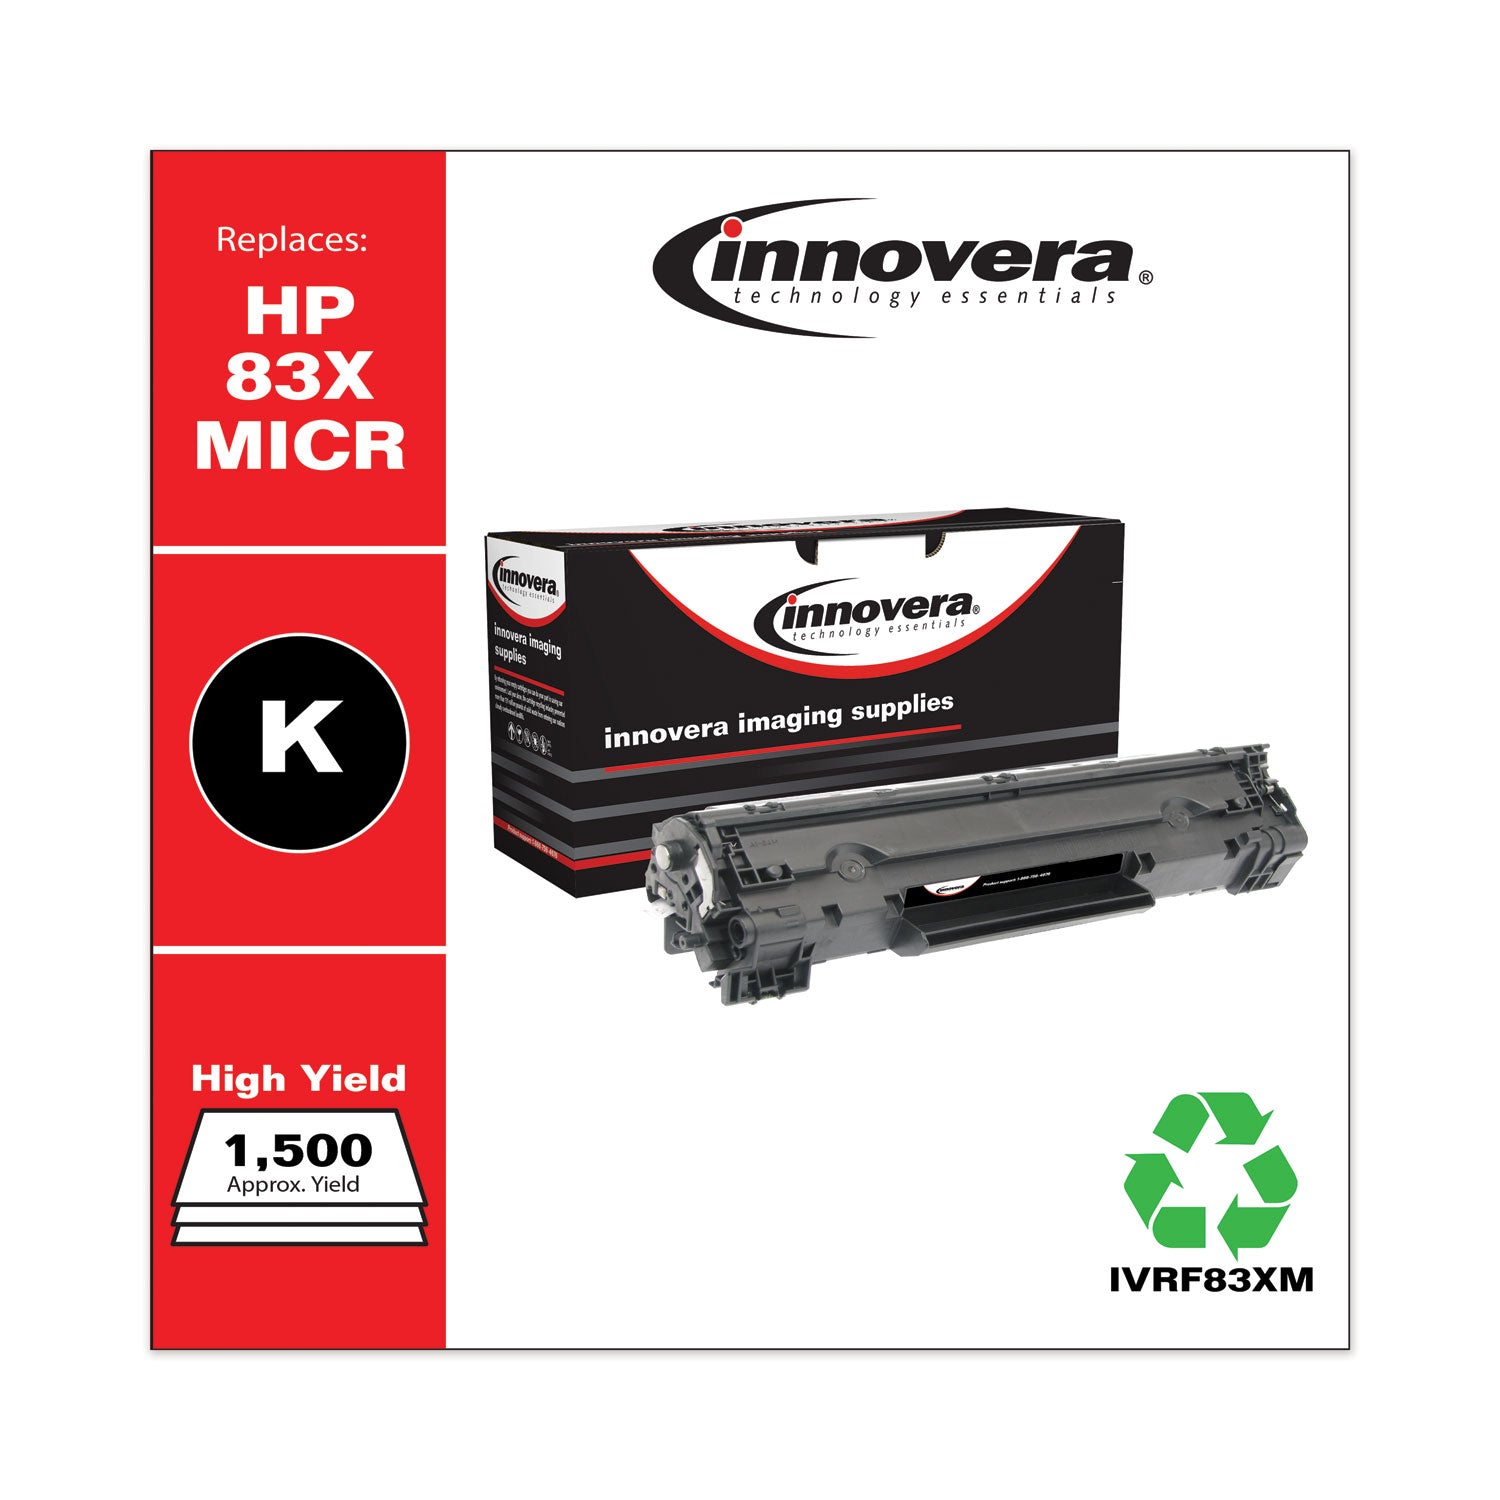 remanufactured-black-high-yield-micr-toner-replacement-for-83xm-cf283xm-2200-page-yield-ships-in-1-3-business-days_ivrf83xm - 2